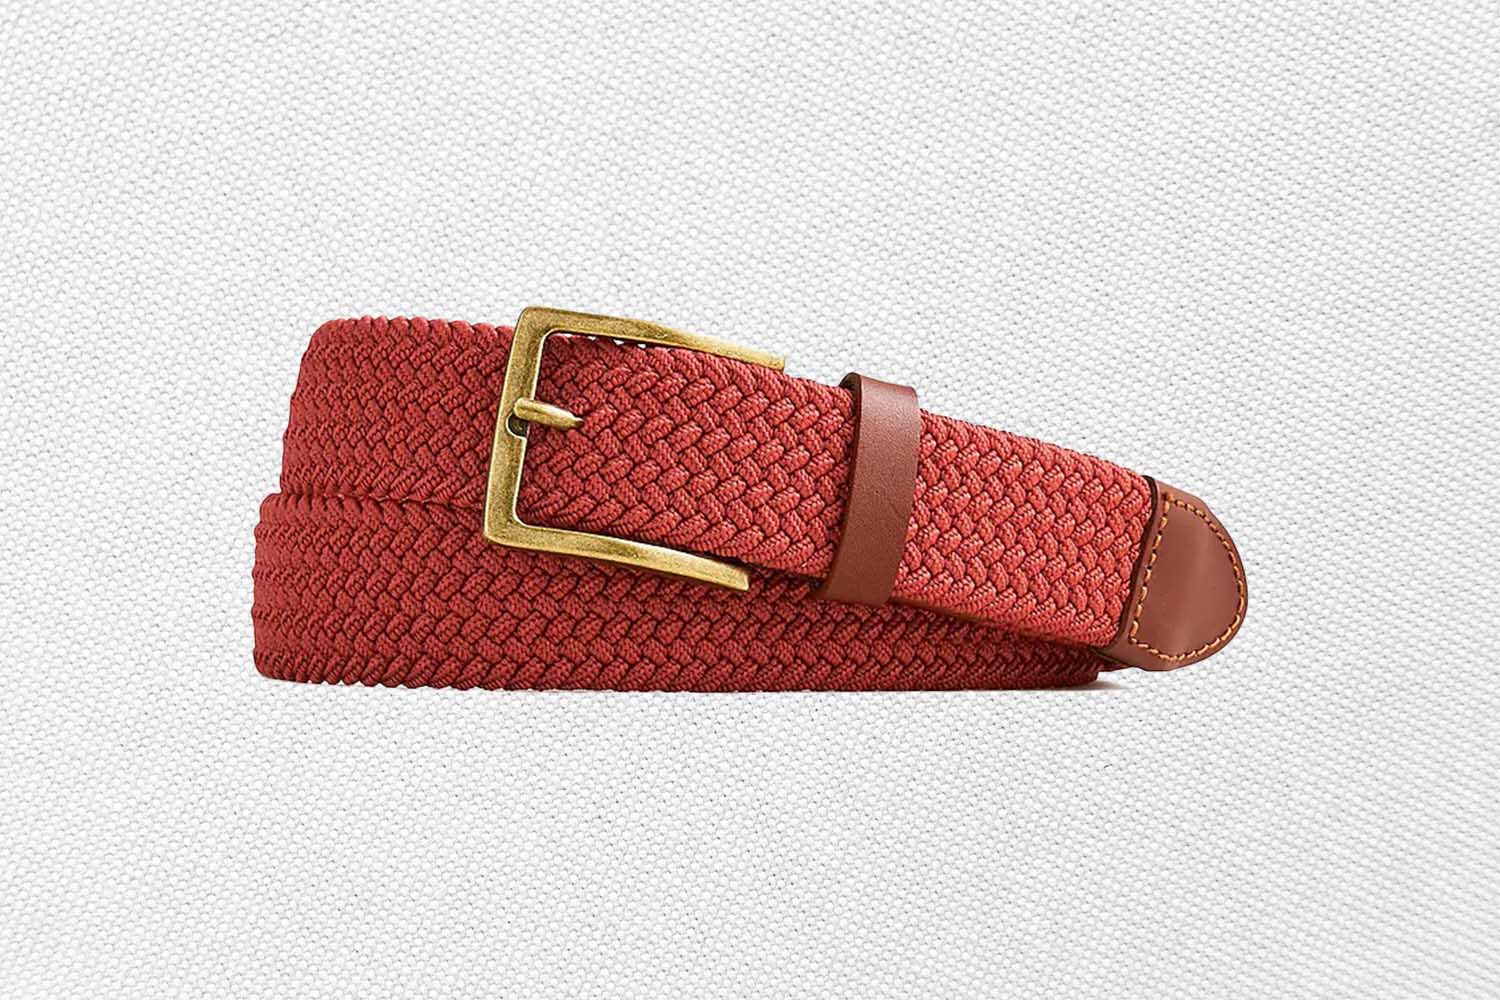 a red woven belt with a gold buckle from J.Crew on a grey background